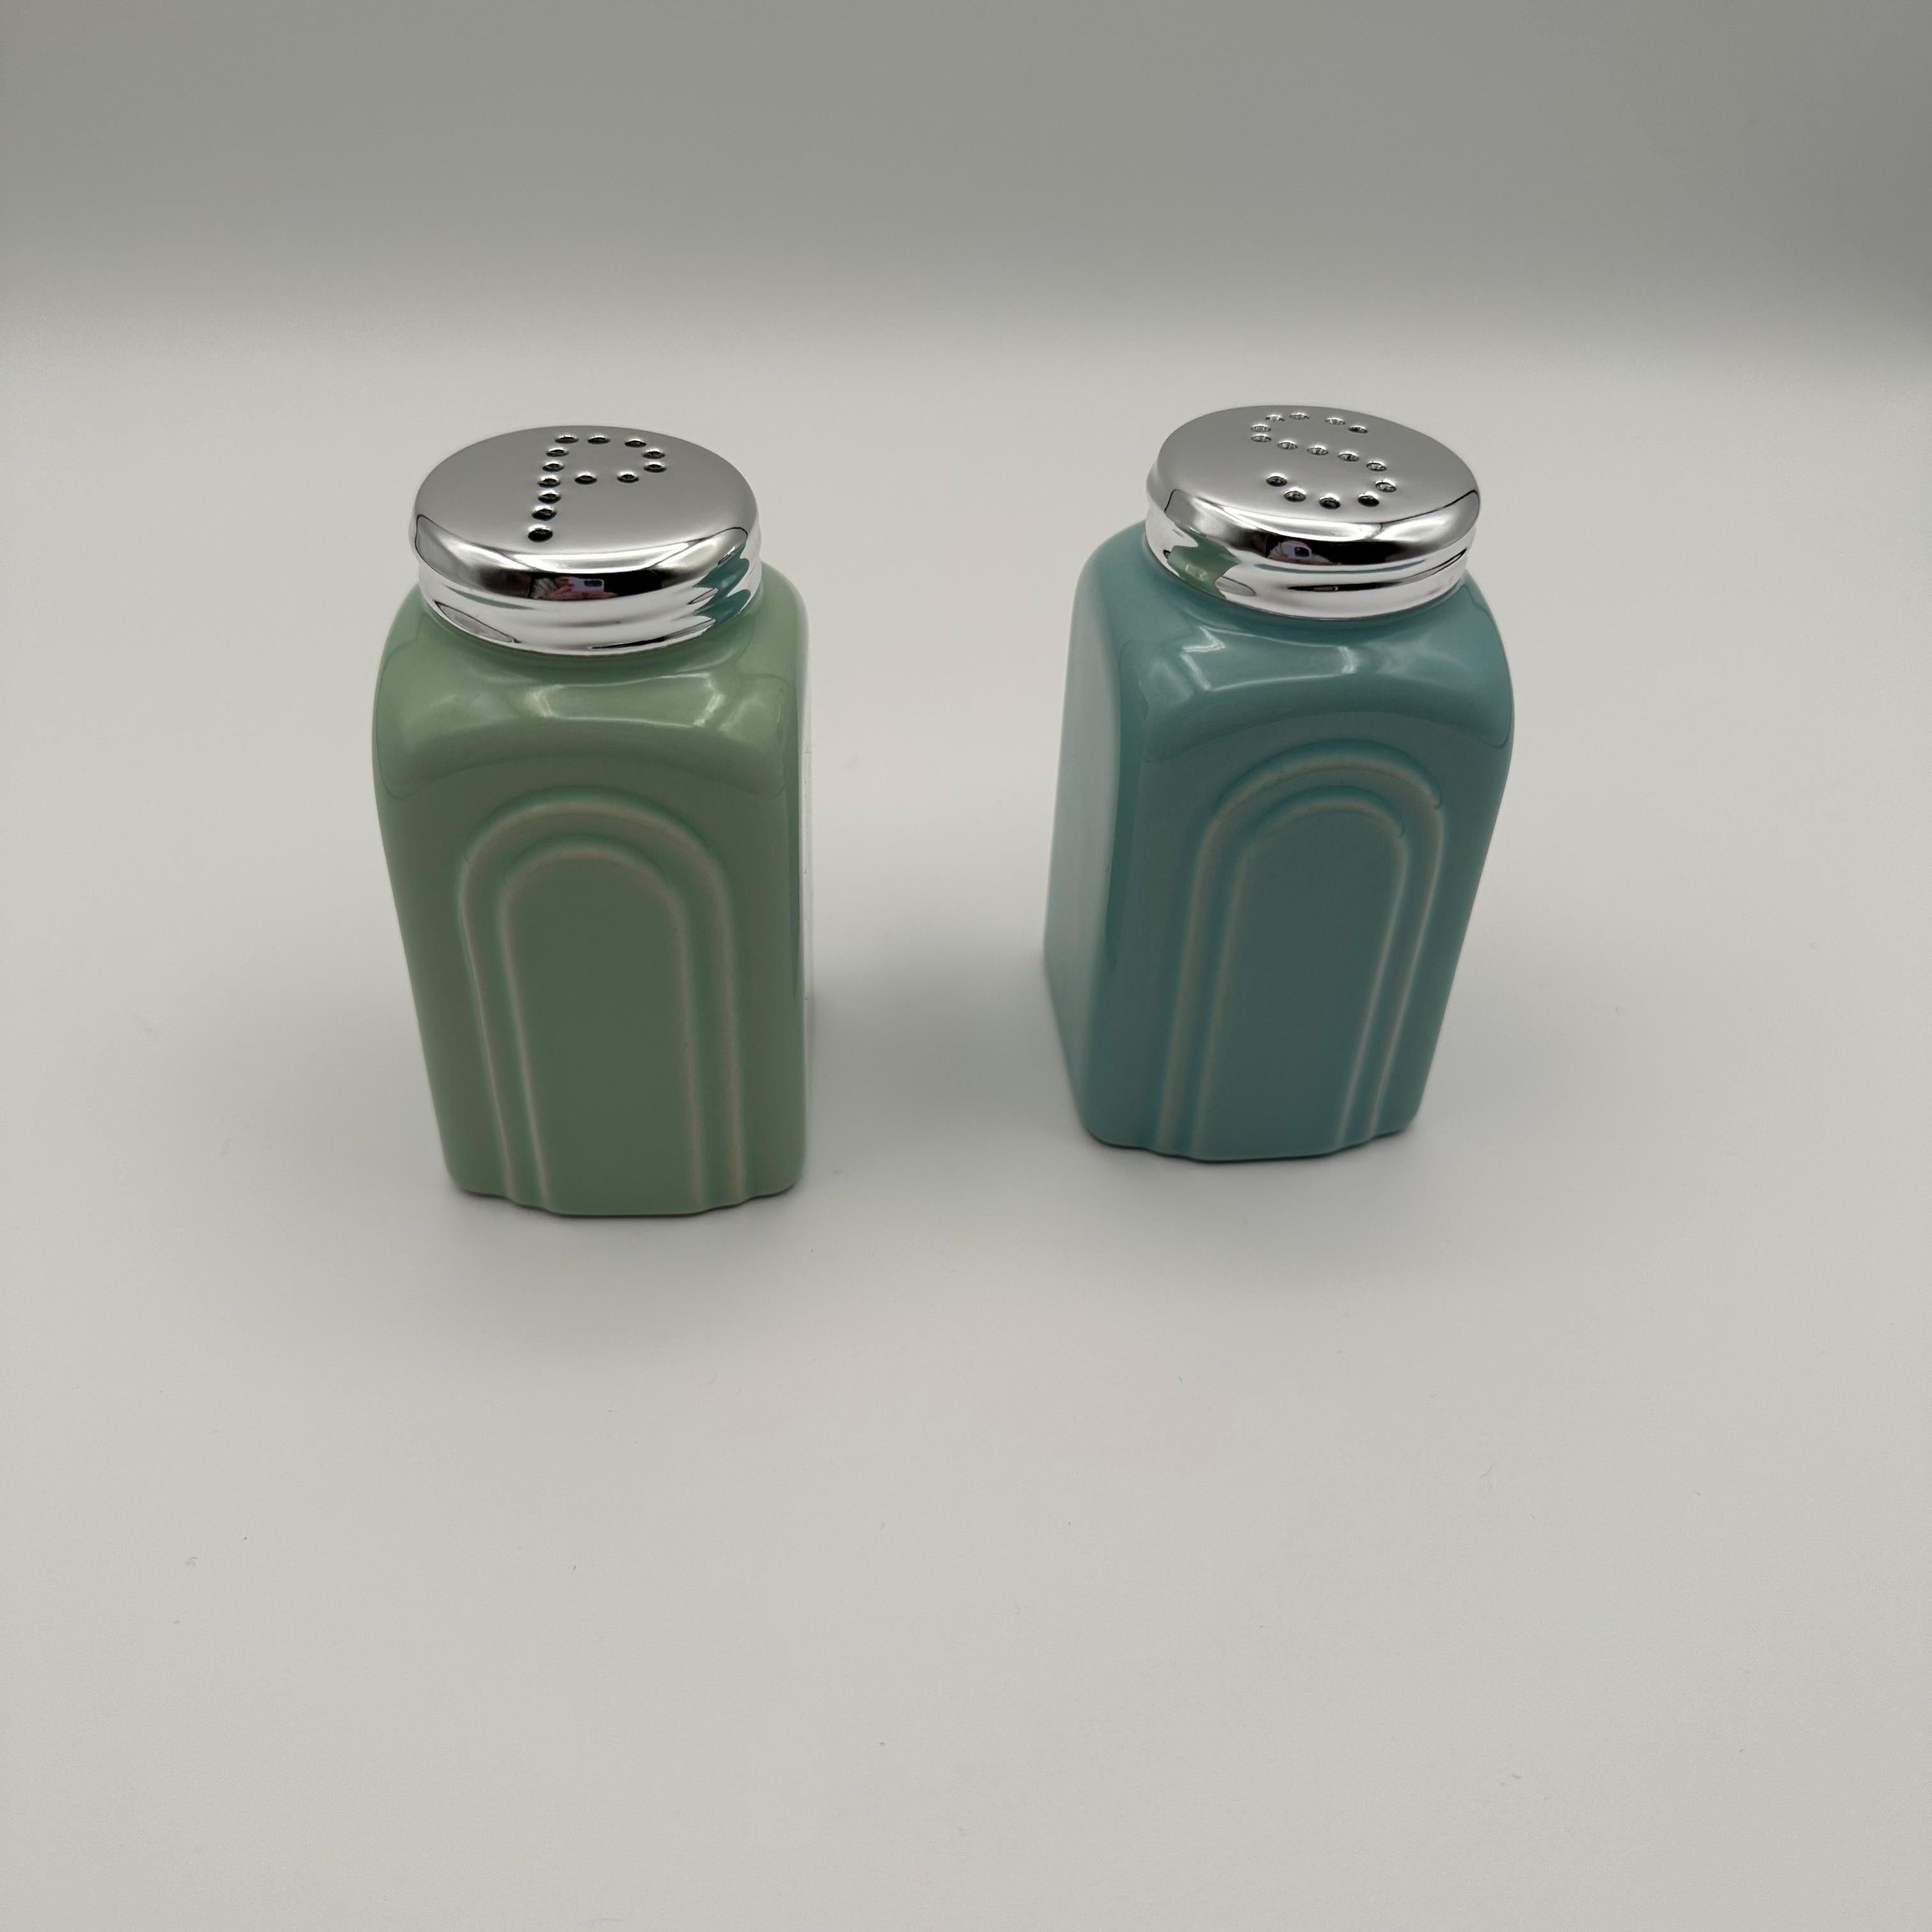 Vintage Art Deco Style Ceramic Salt and Pepper Shakers. A pair glazed in coordinating tones of blue and green. Featuring an art deco style layered arching motif on opposing sides. Stylized holes on the aluminum top pierced in the shape of 